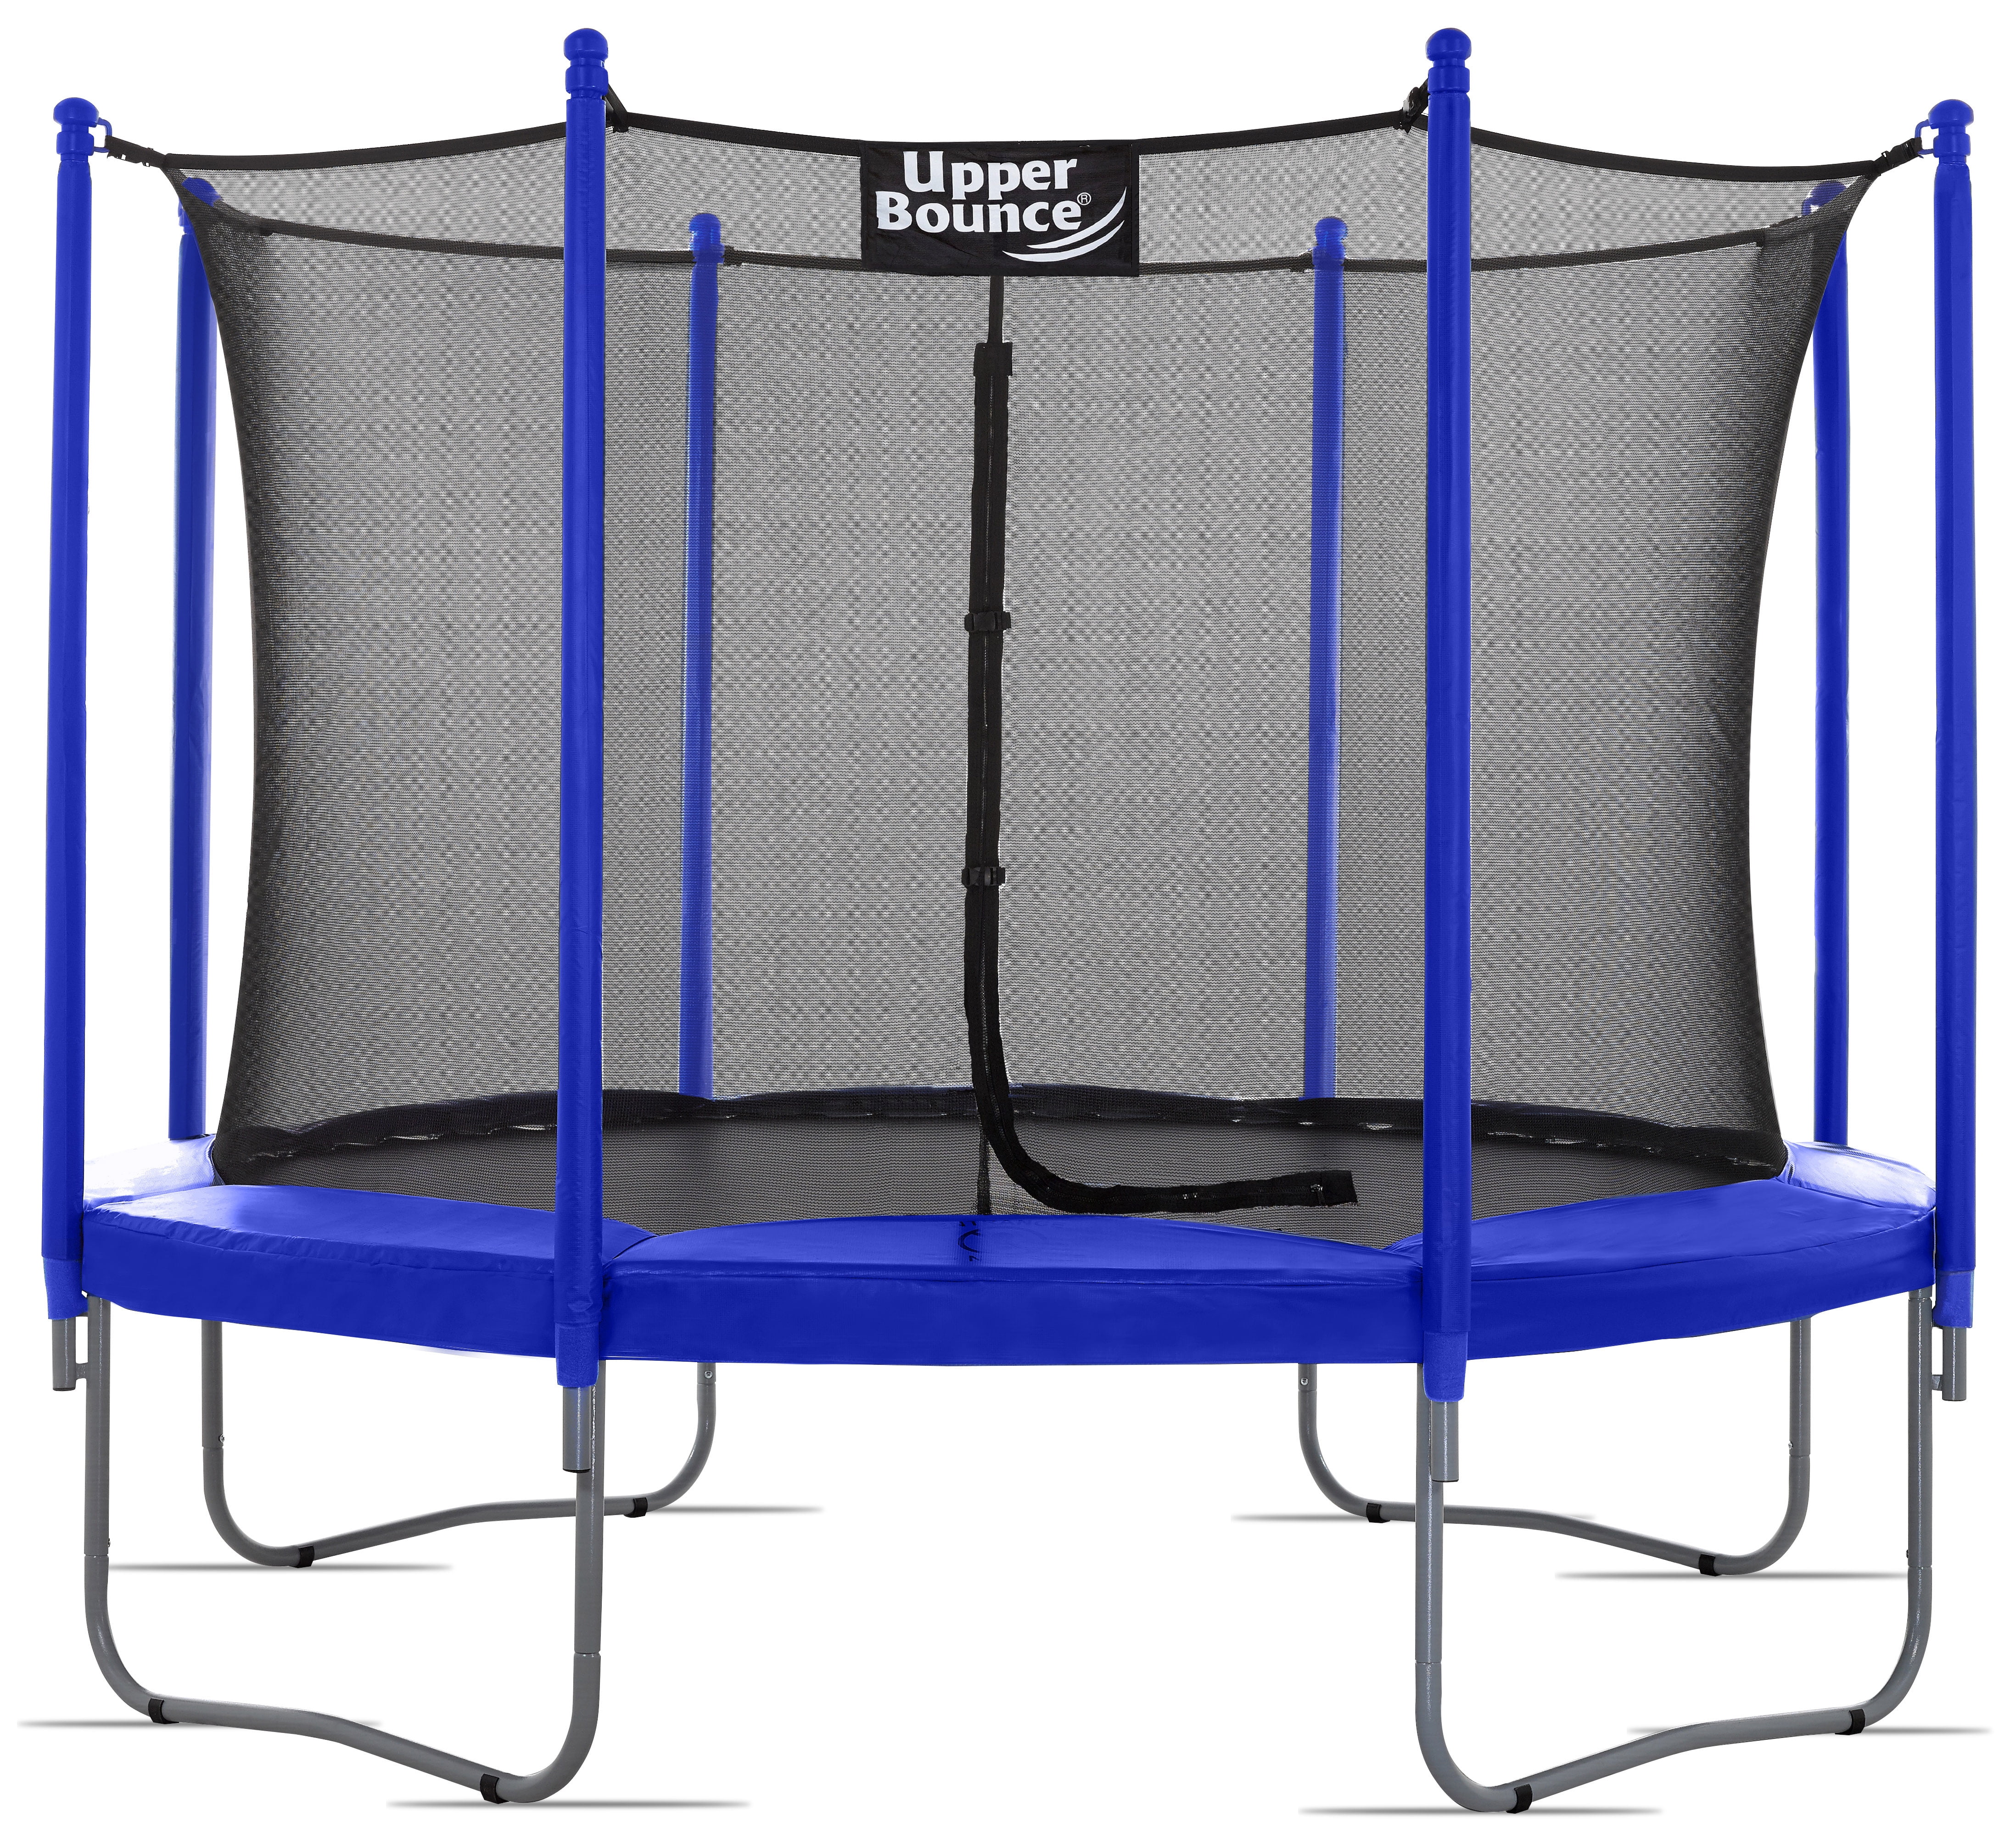 Machrus Upper Bounce 10 FT Round Trampoline Set with Safety Enclosure System – Backyard Trampoline - Outdoor Trampoline for Kids - Adults